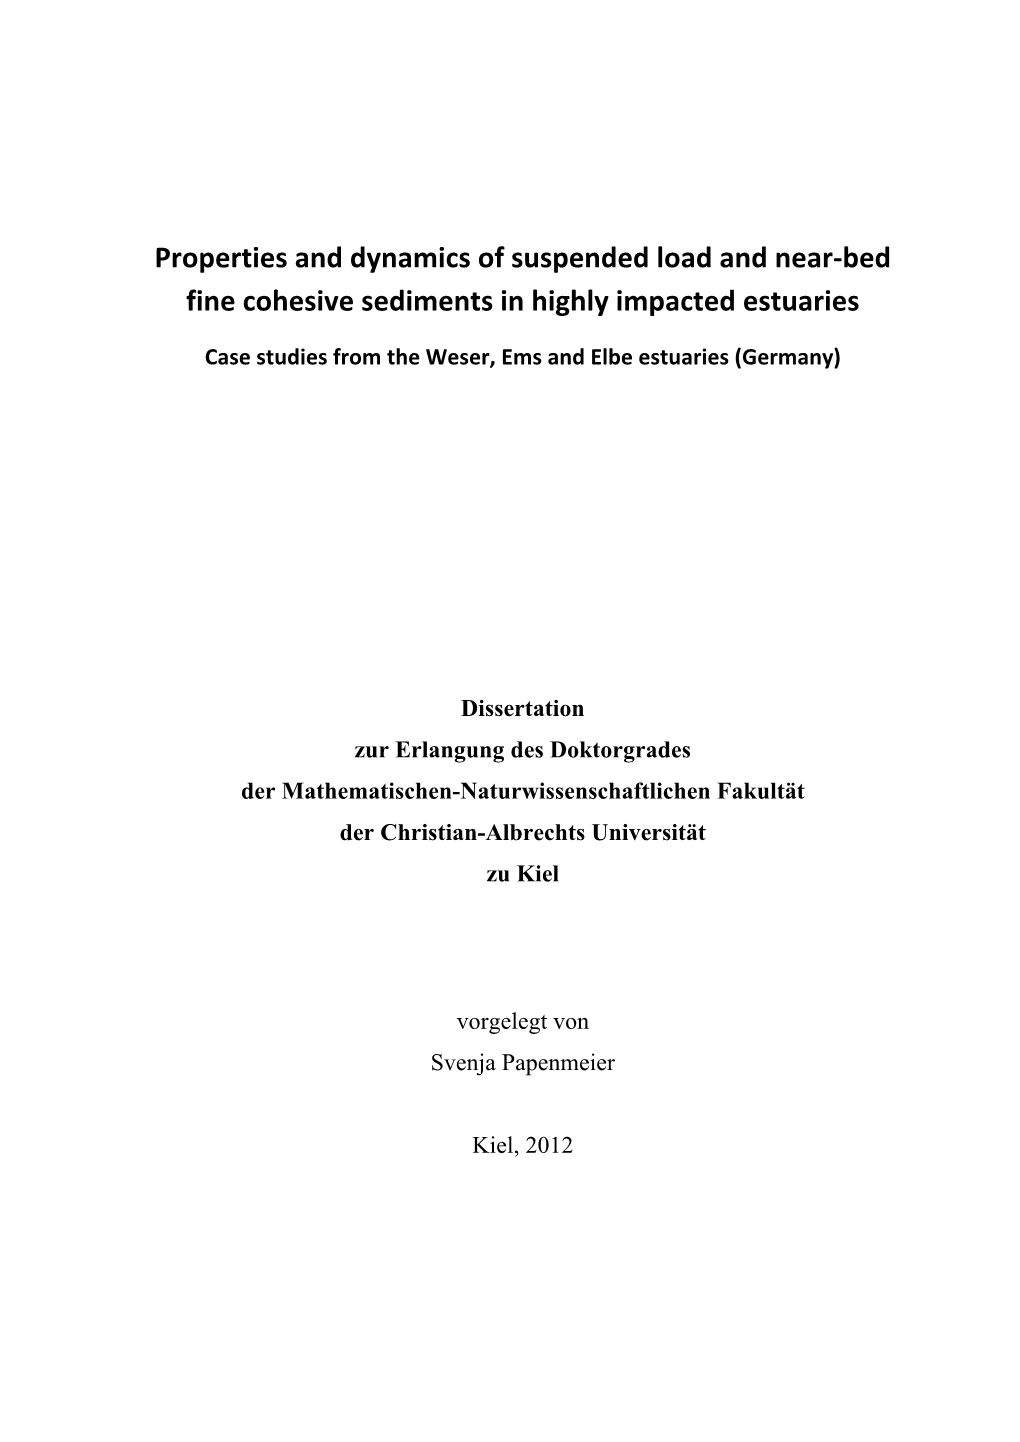 Properties and Dynamics of Suspended Load and Near-Bed Fine